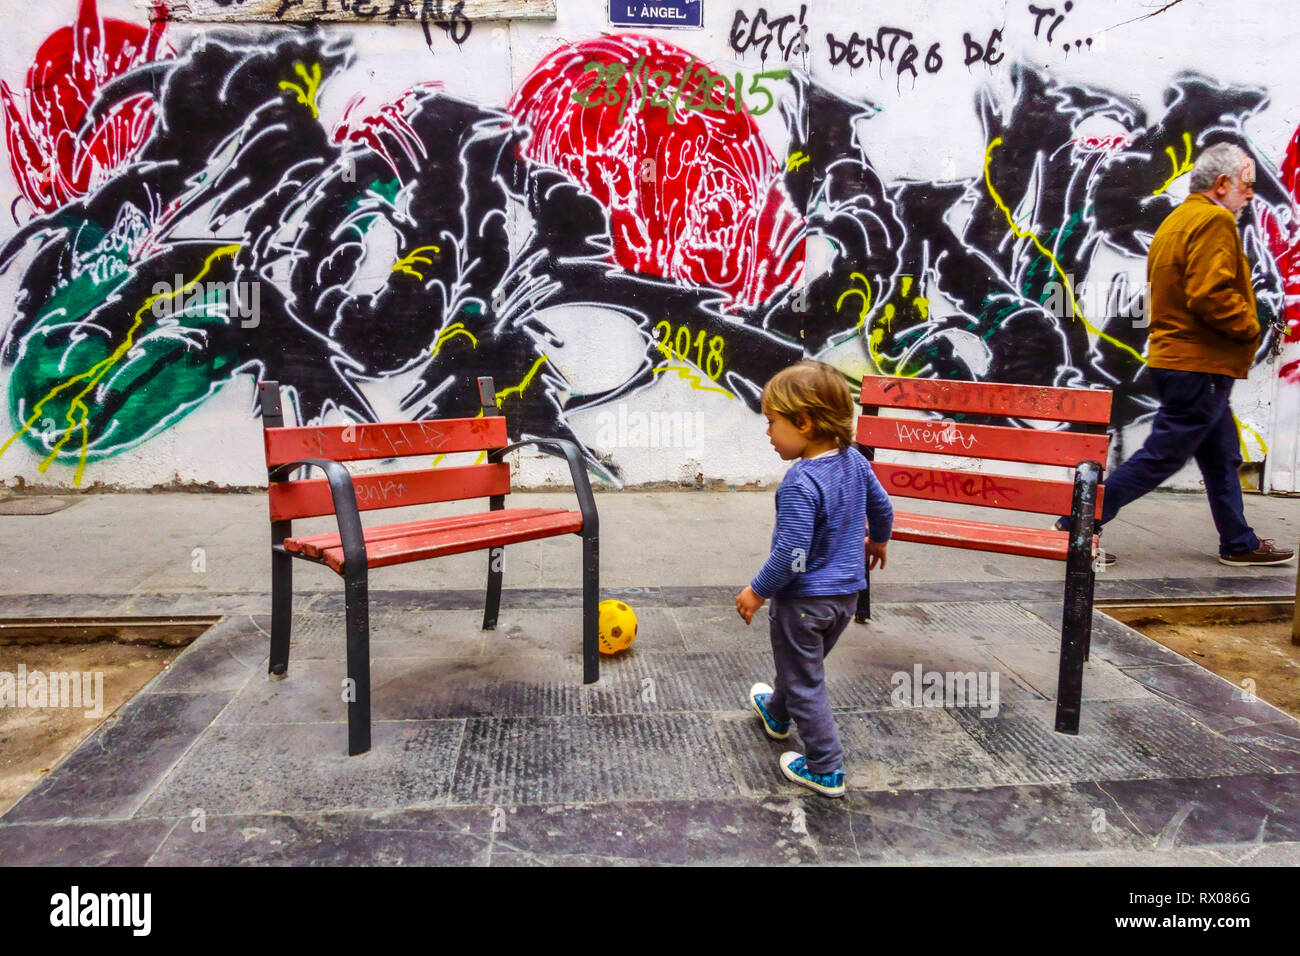 Street view, A child playing with a ball and a man passing around colorful graffiti wall, Valencia, Old Town street El Carmen district Stock Photo